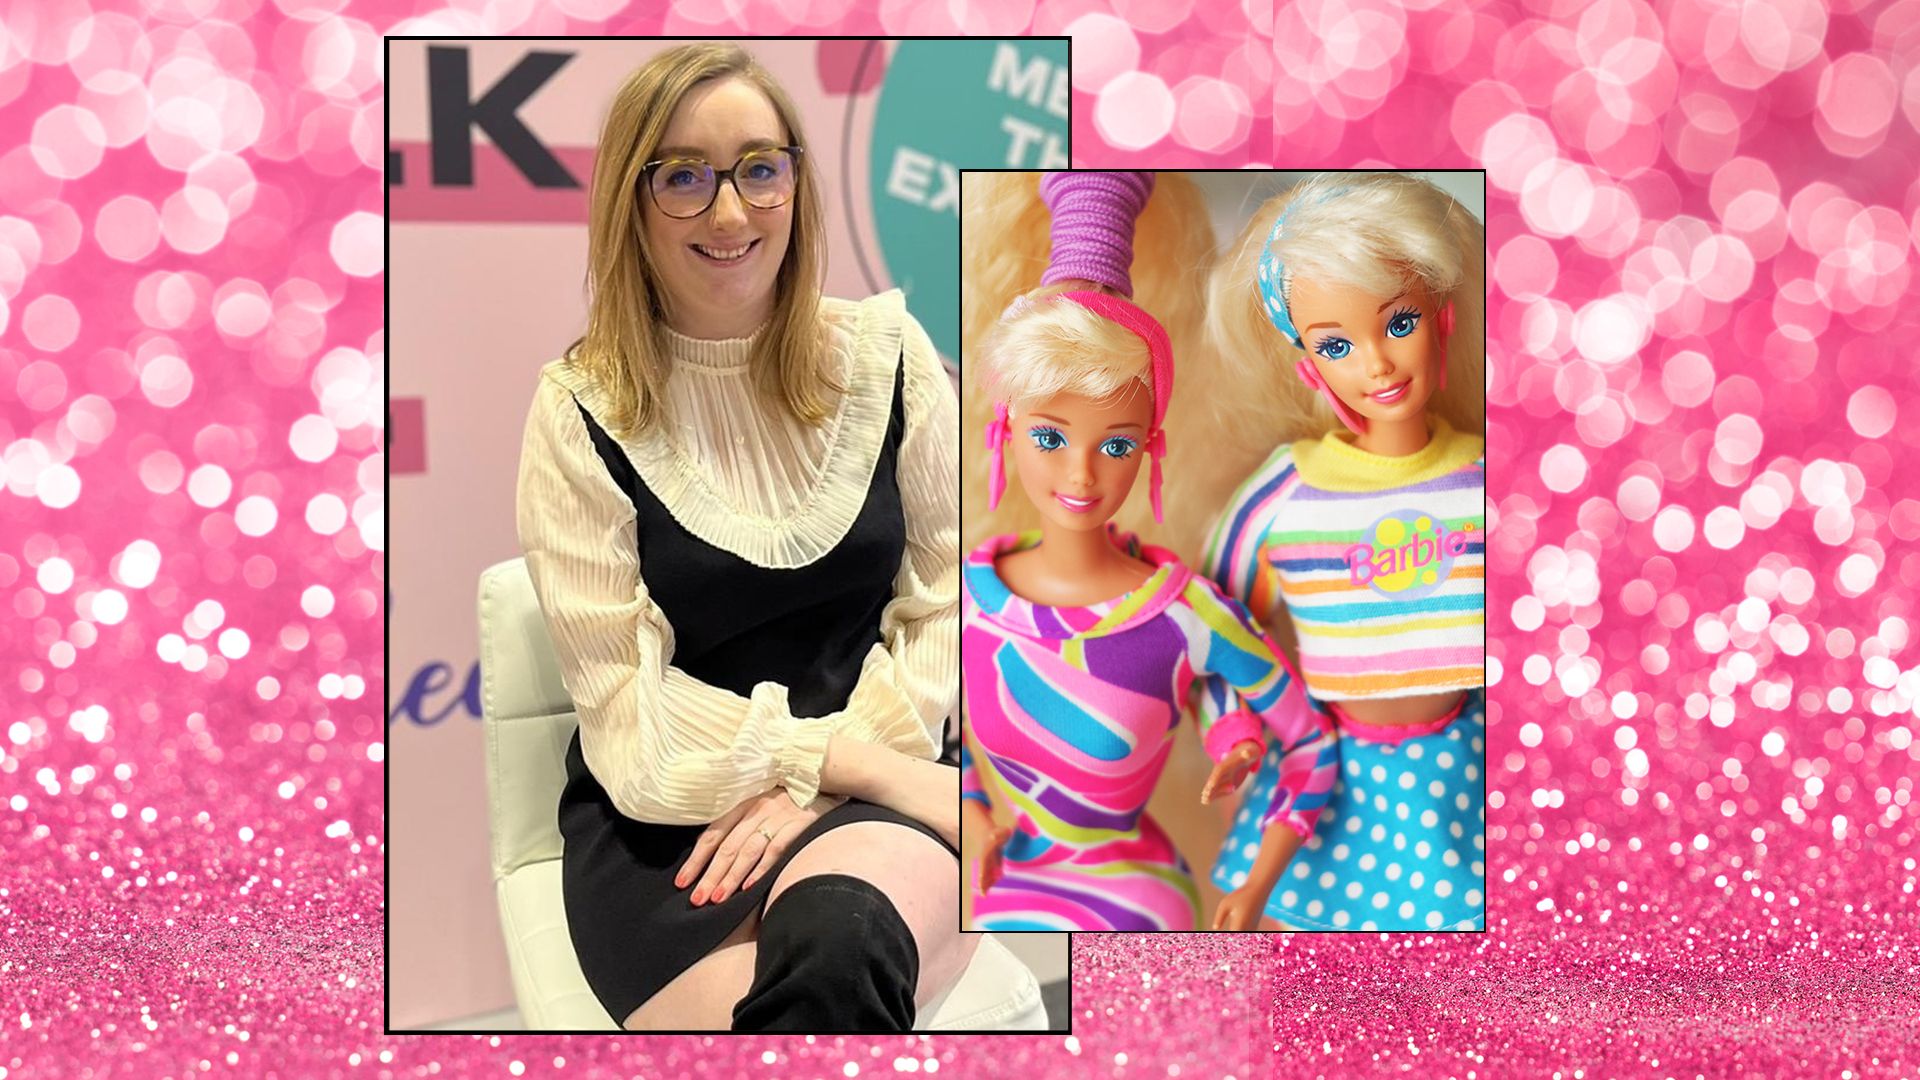 Woman on a pink sparkly background next to Barbie